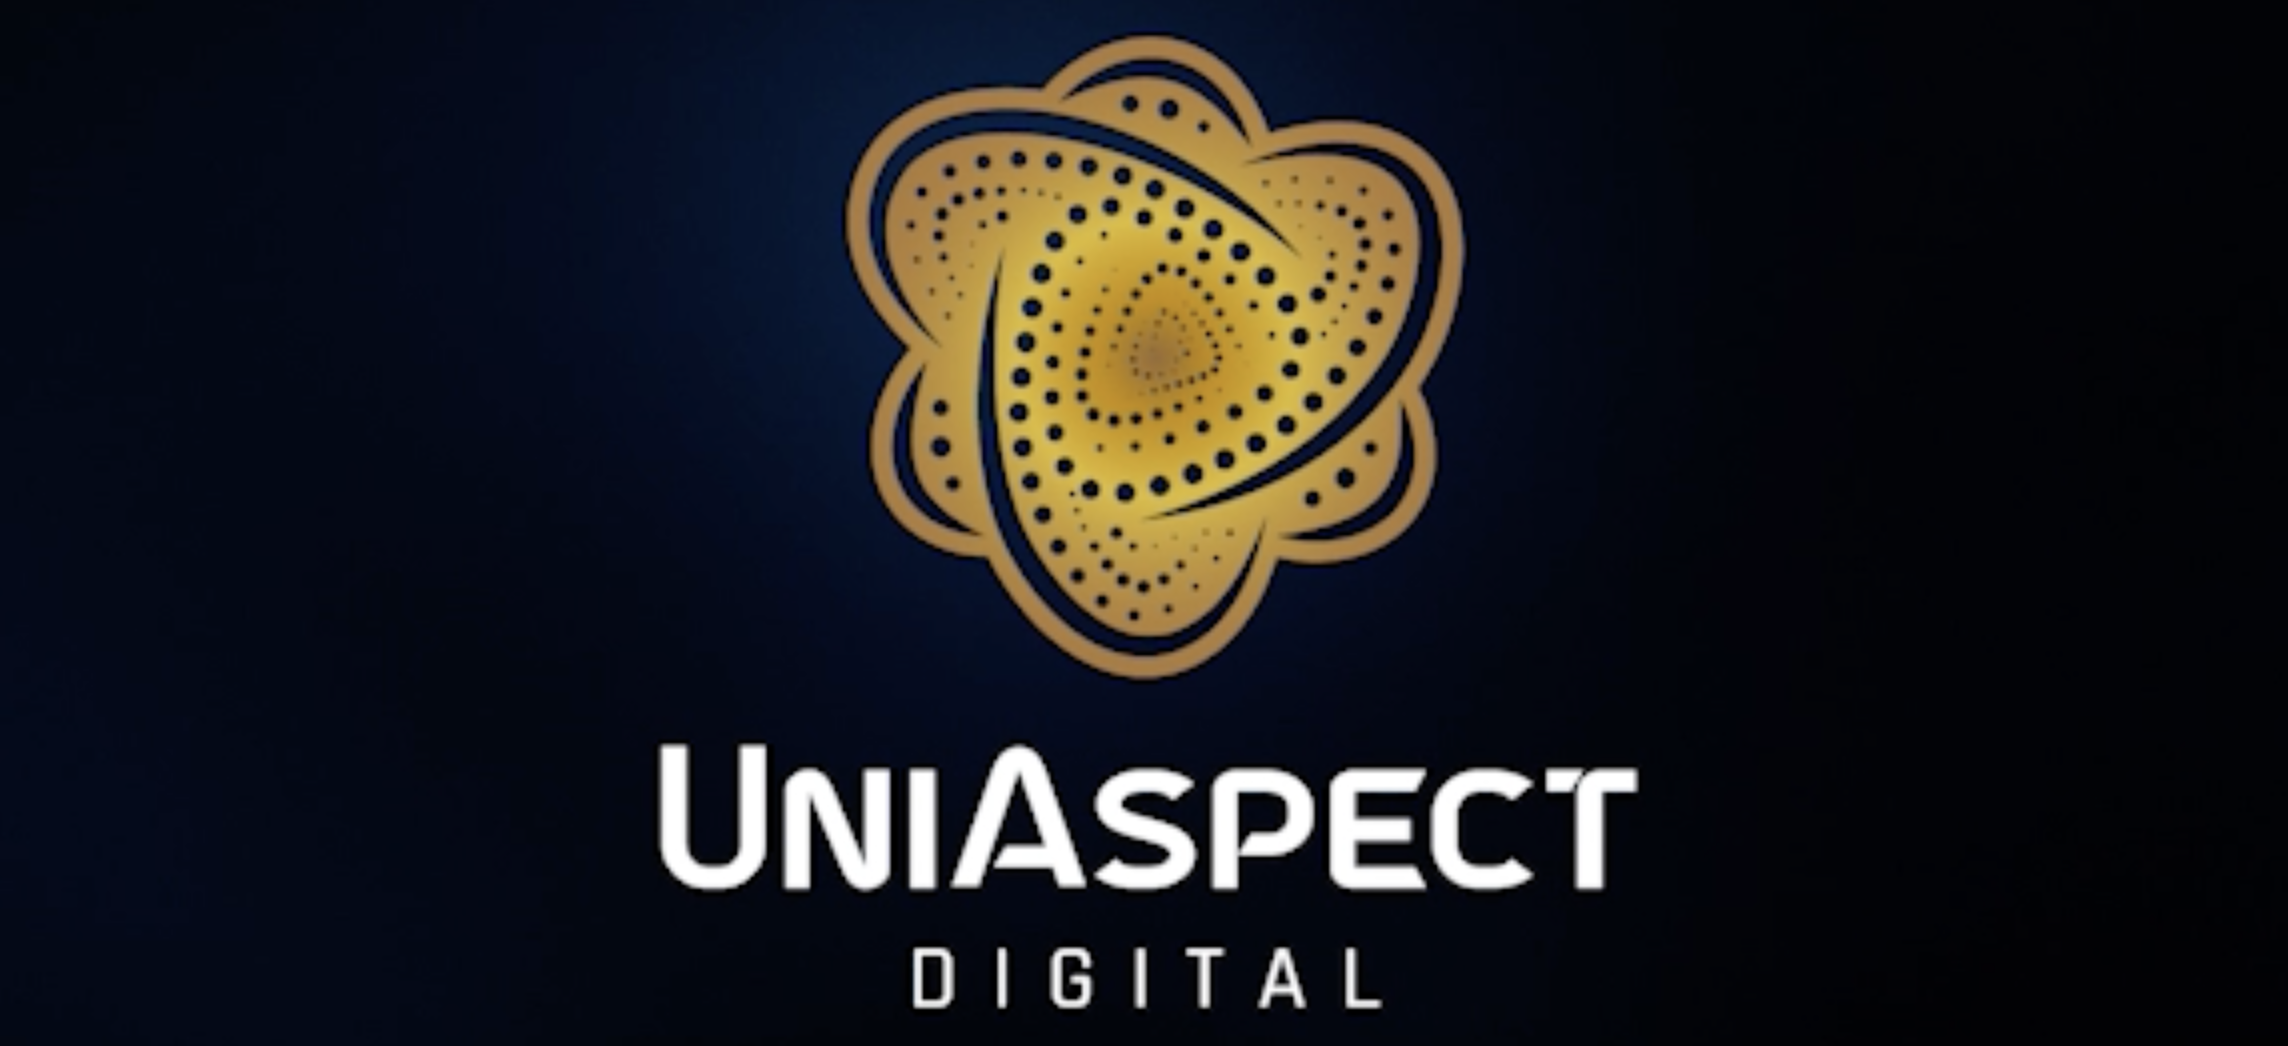 UniAspect Digital Launches to Offer Comprehensive Solutions for Digital Business Transformation Success